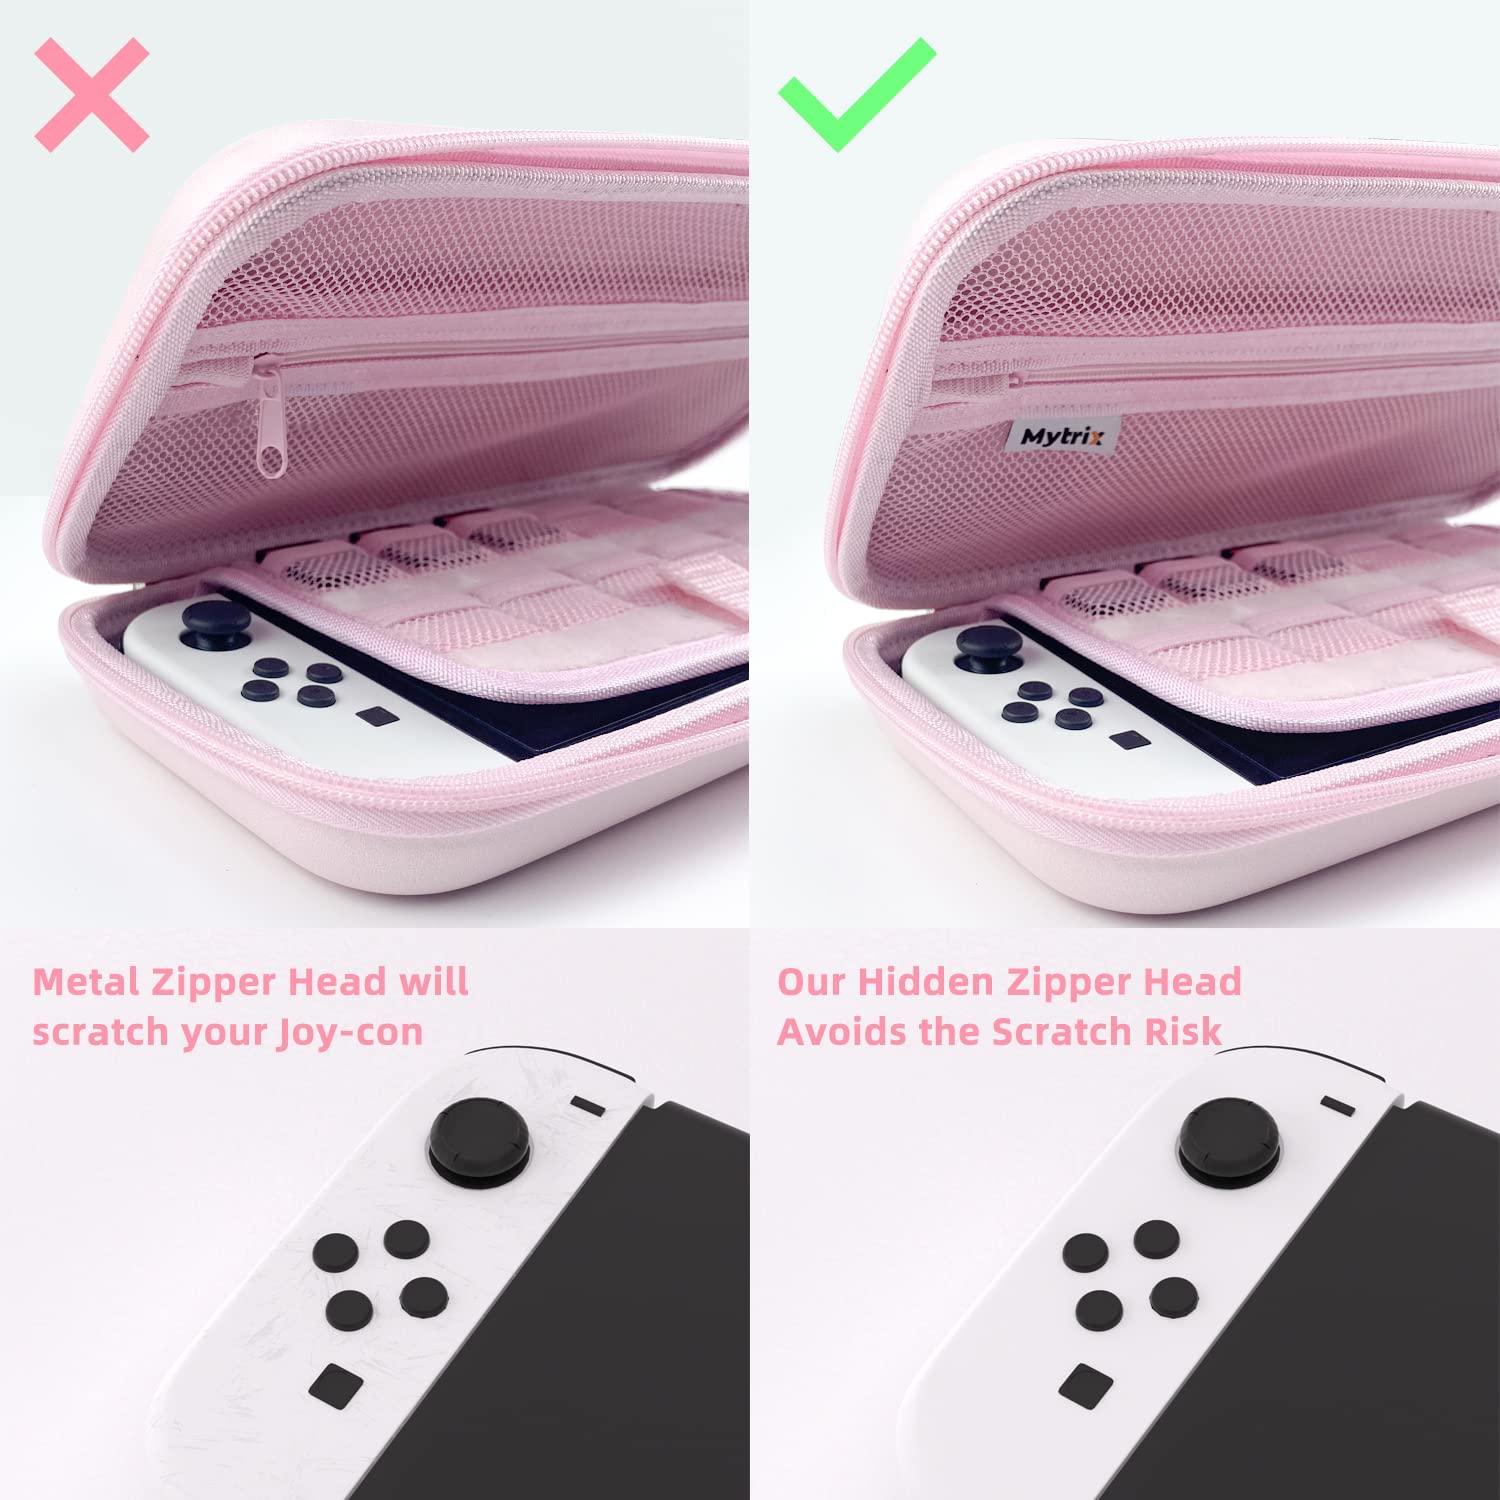 Mytrix Sakura Pink Carrying Case 4 in 1 Bundle for Nintendo Switch OLED, Skin Stickers, Screen Protector, 2 Joystick Caps